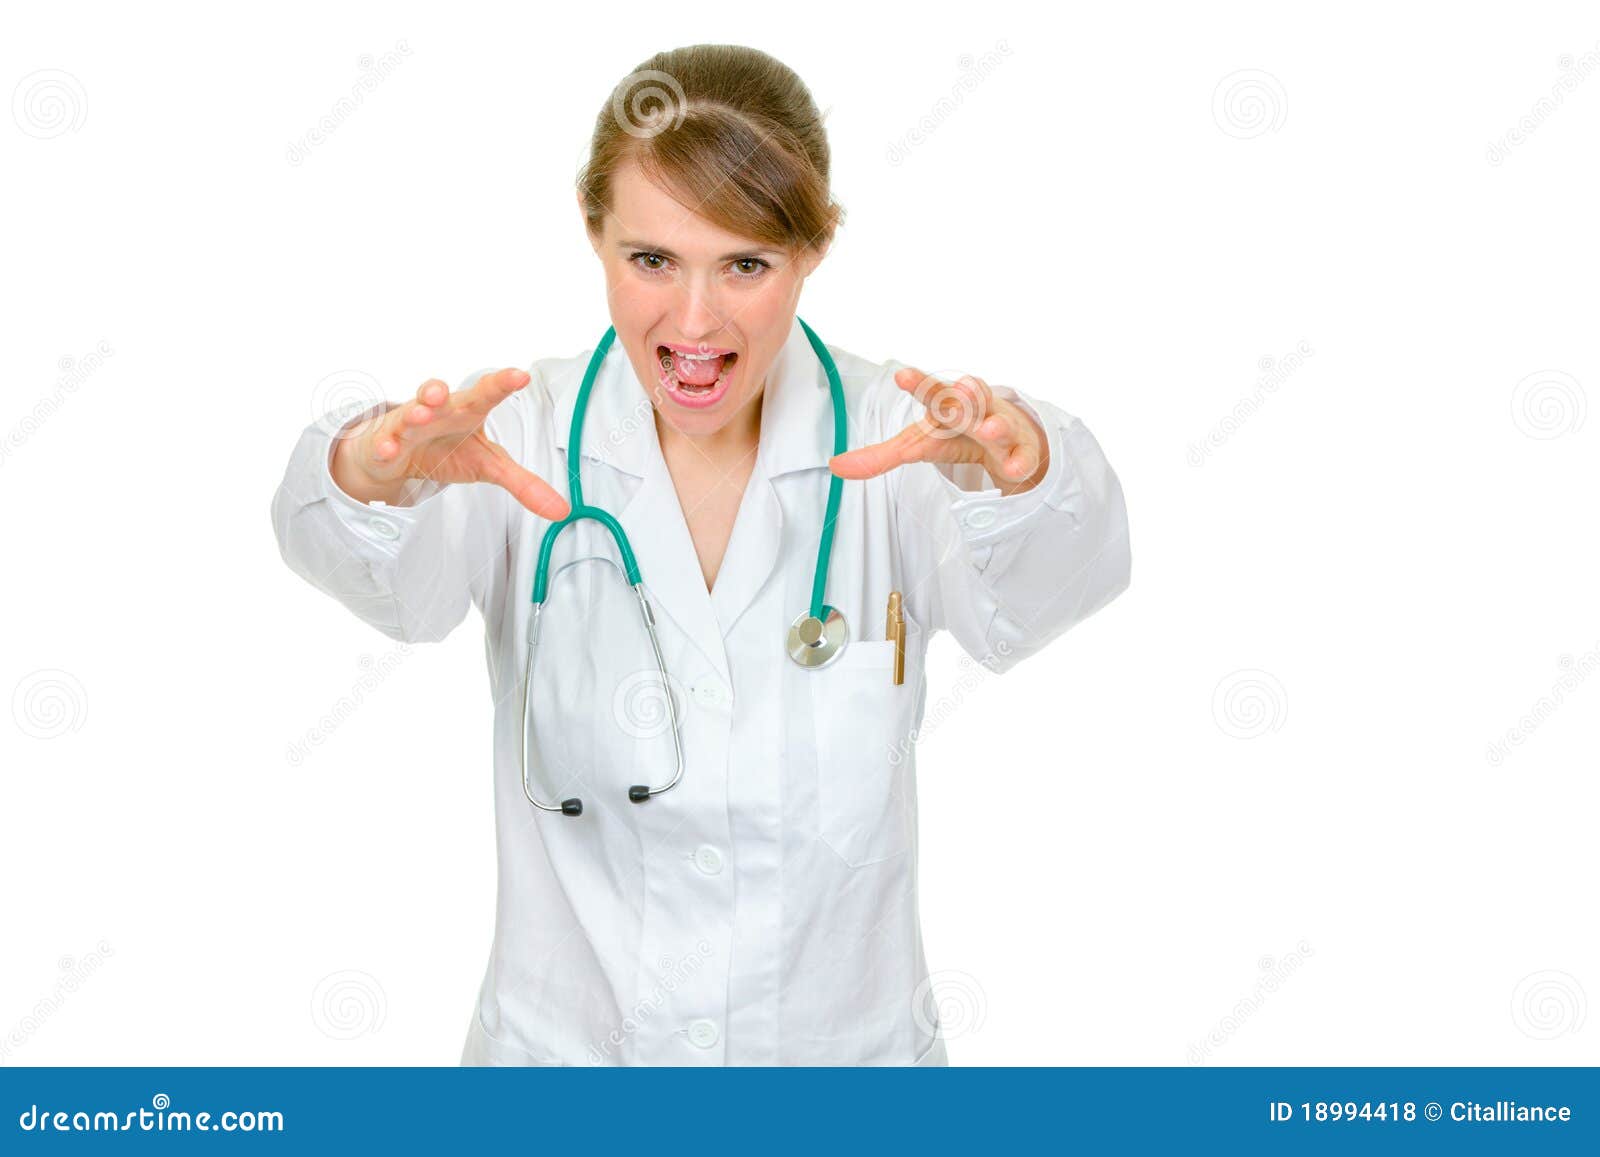 https://thumbs.dreamstime.com/z/angry-doctor-woman-wants-to-catch-you-18994418.jpg